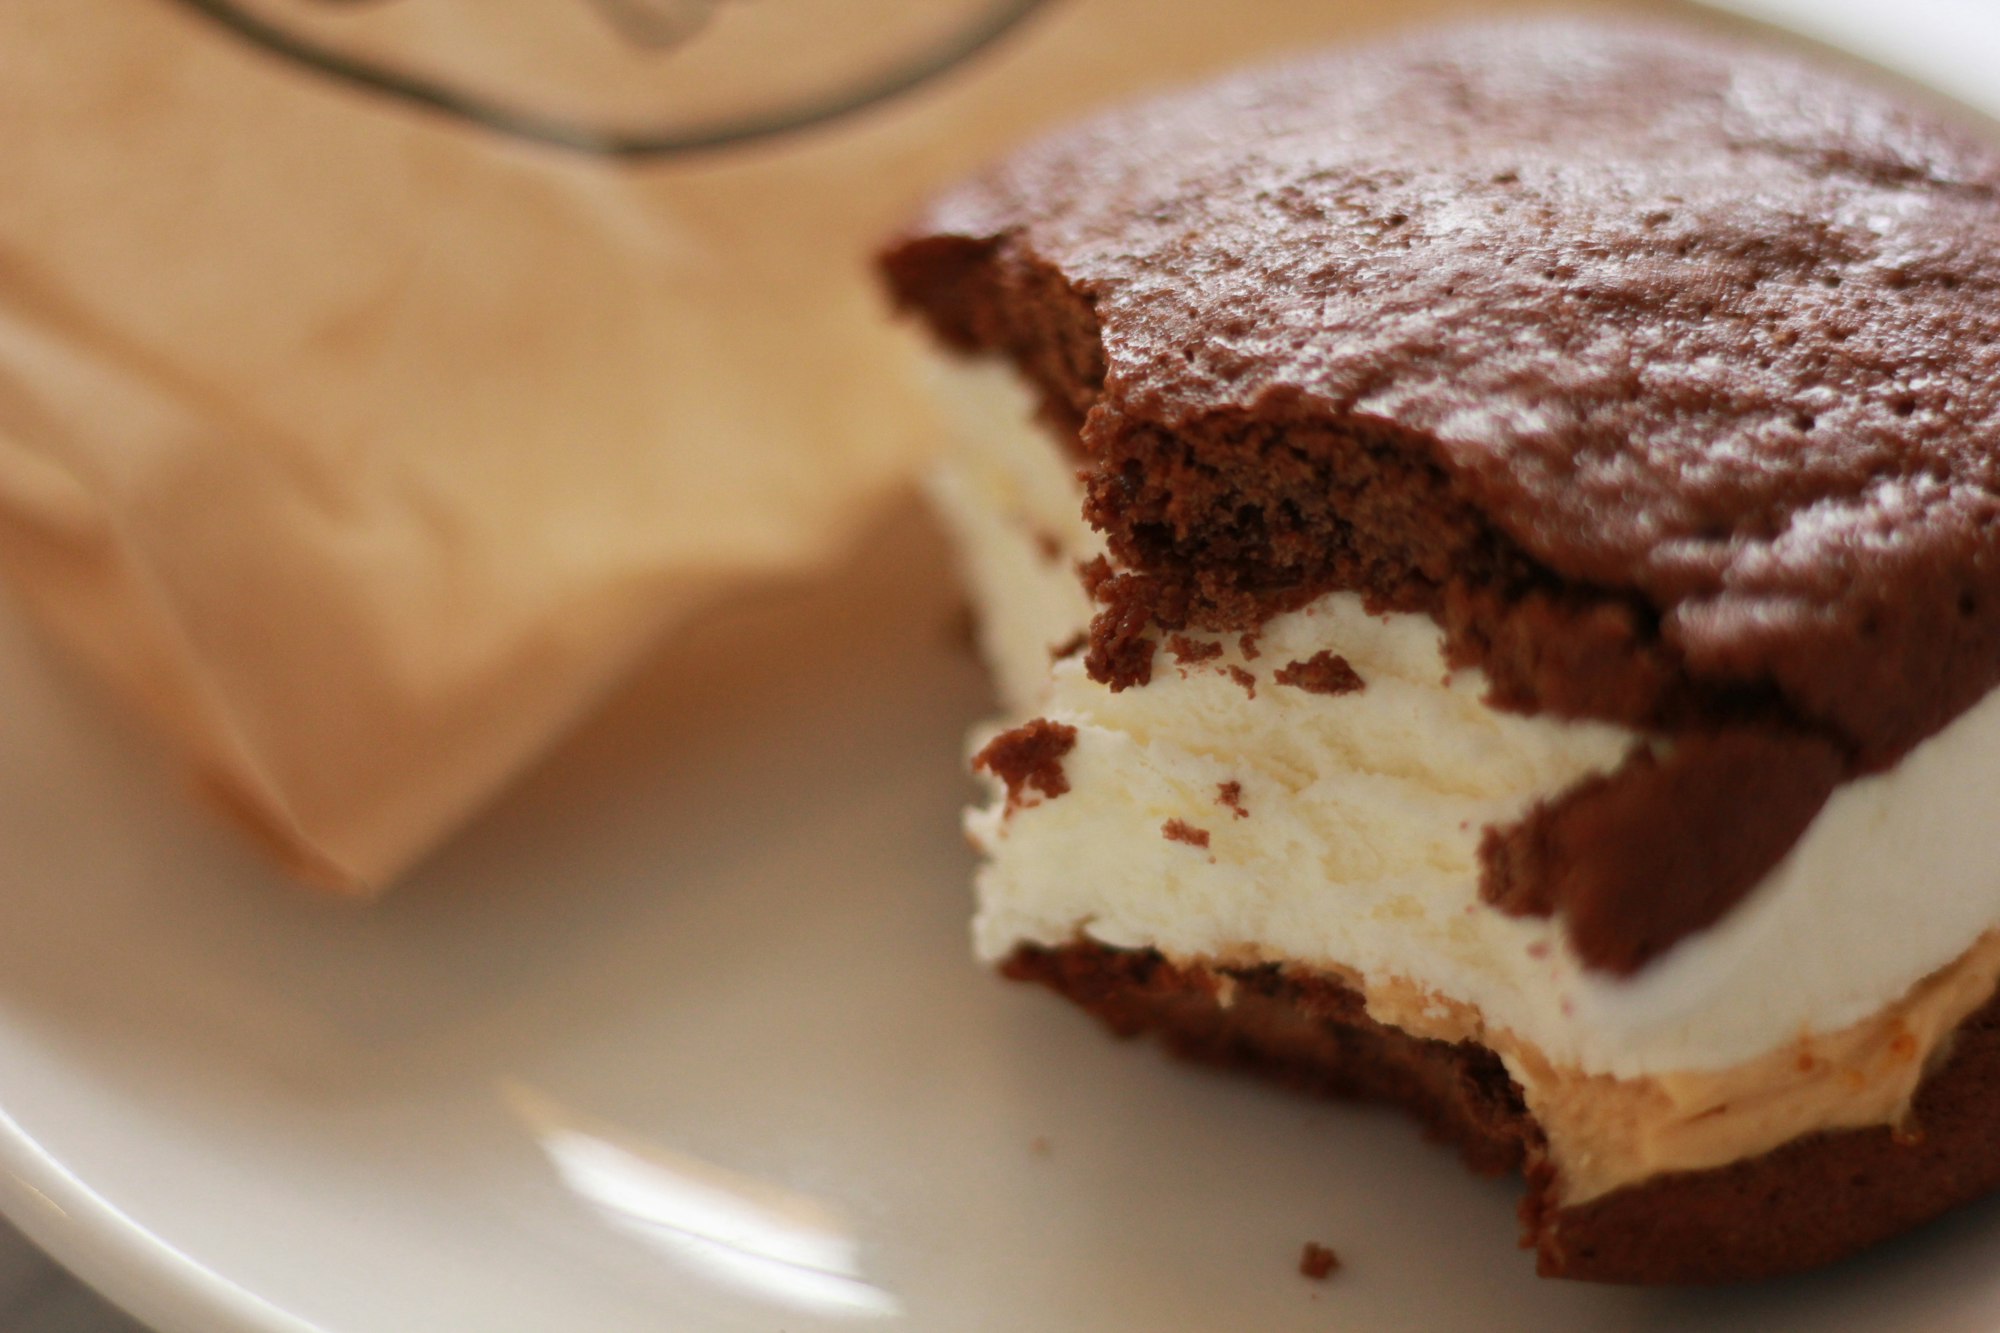 Decadent chocolate cookies with ice cream in a sandwich